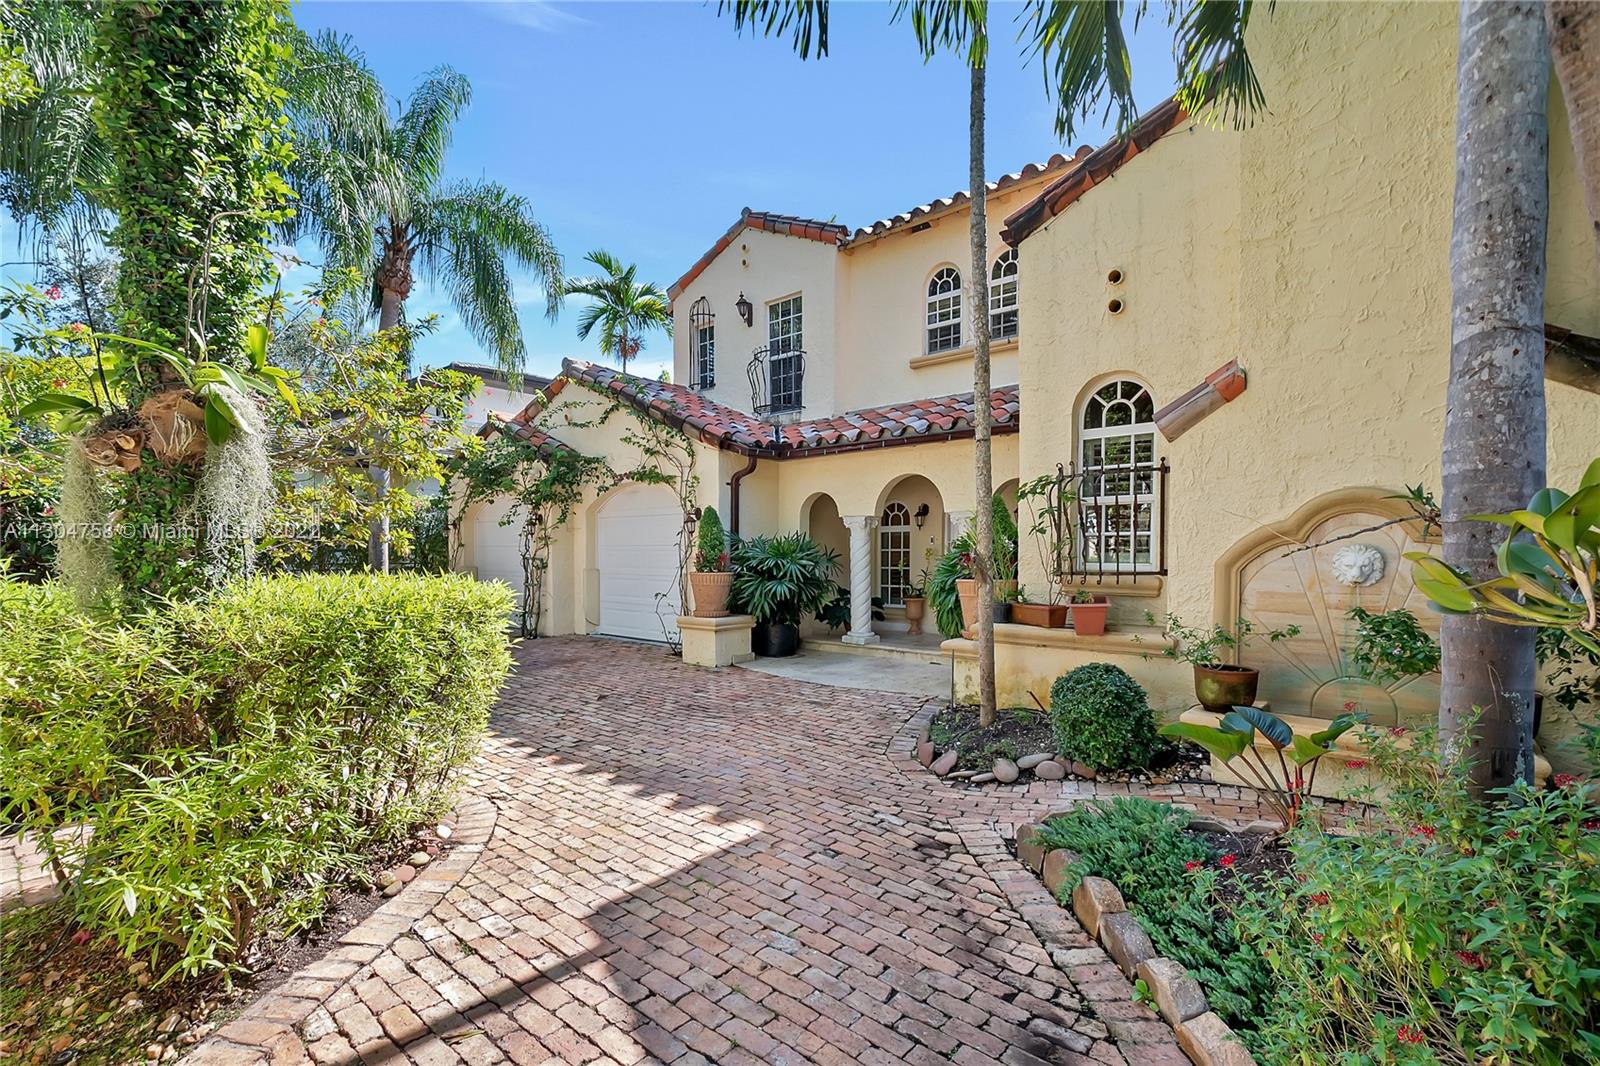 Stunning, classic Spanish style home built in 1923, renovated & move-in ready. 5 bdrm/ 3.5 bath home, on a 11,250 sq ft lot, on the quintessential Asturia Av in Coral Gables. Beautiful architectural details. Many entertaining areas incl. formal living w/ fireplace, formal dining, sunroom & charming interior courtyard. Fantastic chef’s kitchen w/ center island, granite counters, wood cabinetry, gas stove. Spacious family rm. 3 bdrms up incl. grand primary suite w/ fireplace, marble bath, terrace w/ seating. 1 ensuite bdrm down, perfect for guests. Relax under the shade on one of many covered patios surrounding the pool & heated jacuzzi. Lush landscaping. Gated, brick paver circular driveway. 2 car garage. Full home generator. Impact windows/doors. Only 1 block from Granada Golf Course.